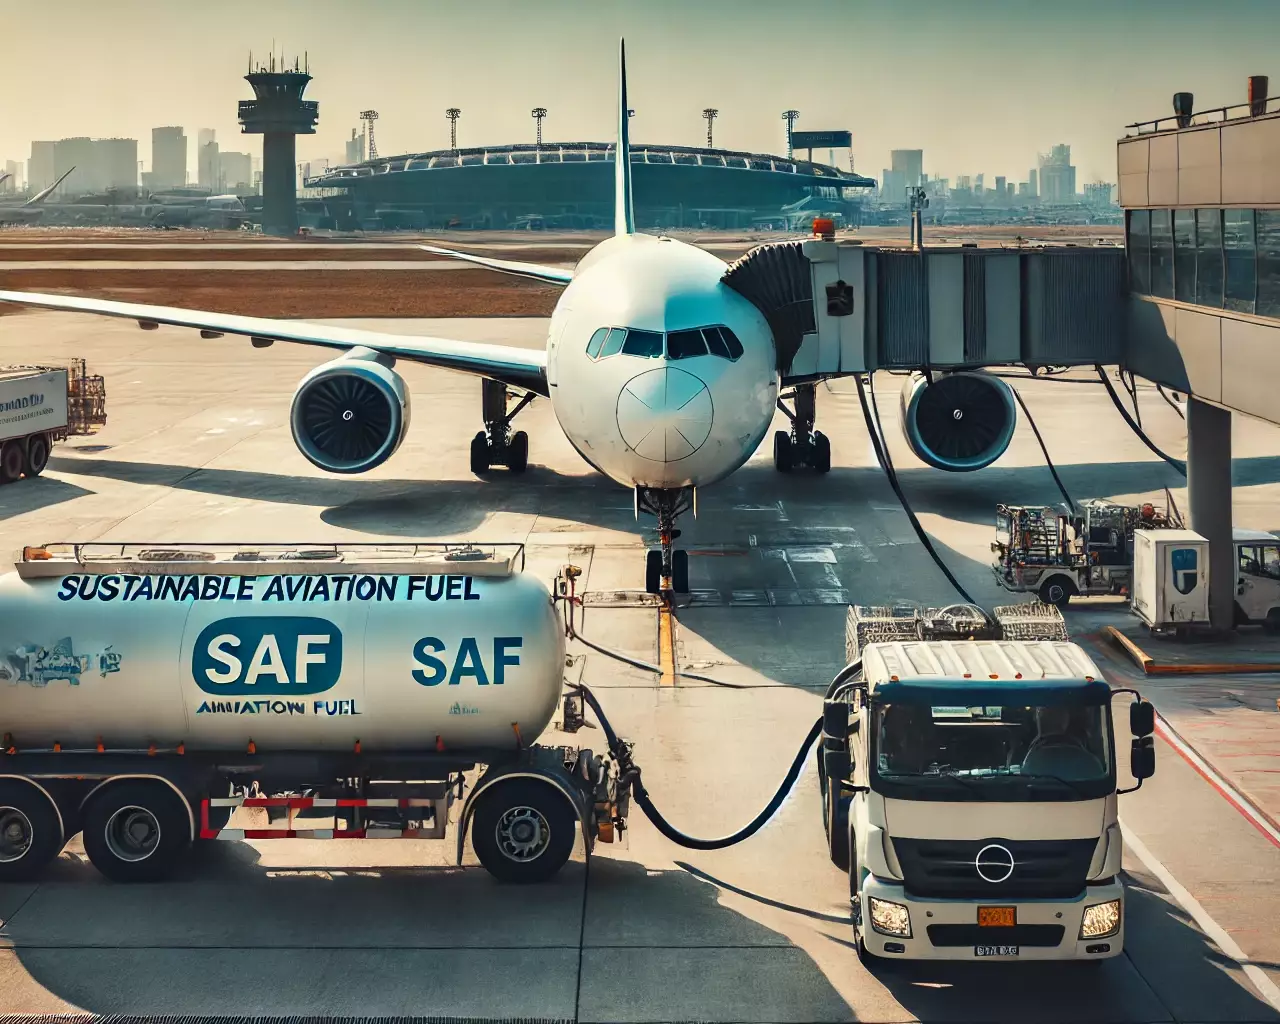 An airplane on the tarmac is being refueled with SAF from a fuel truck. Ground support vehicles and workers are visible around the plane. Airport terminals and the city skyline are in the background under a clear sky.